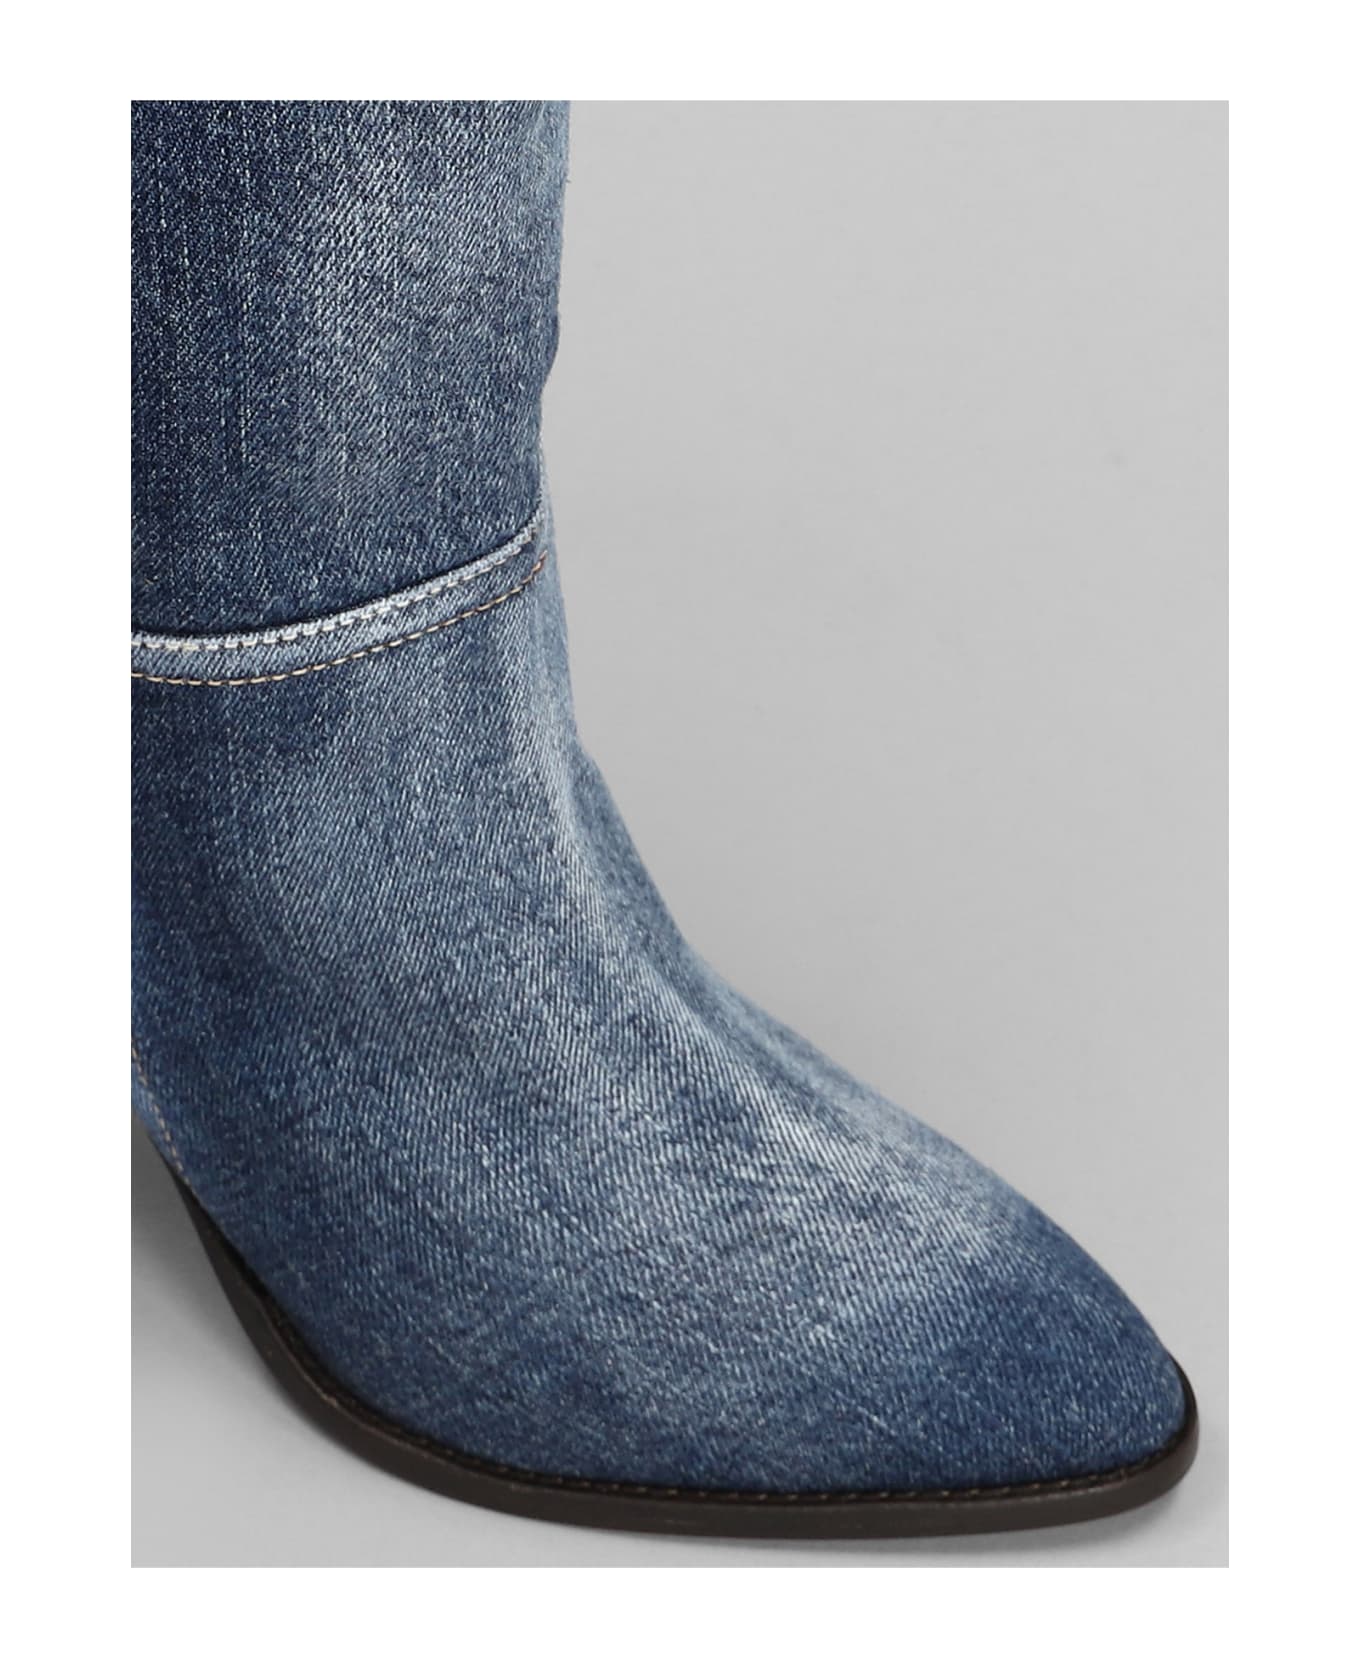 Isabel Marant Rouxa High Heels Ankle Boots - WASHED BLUE ブーツ